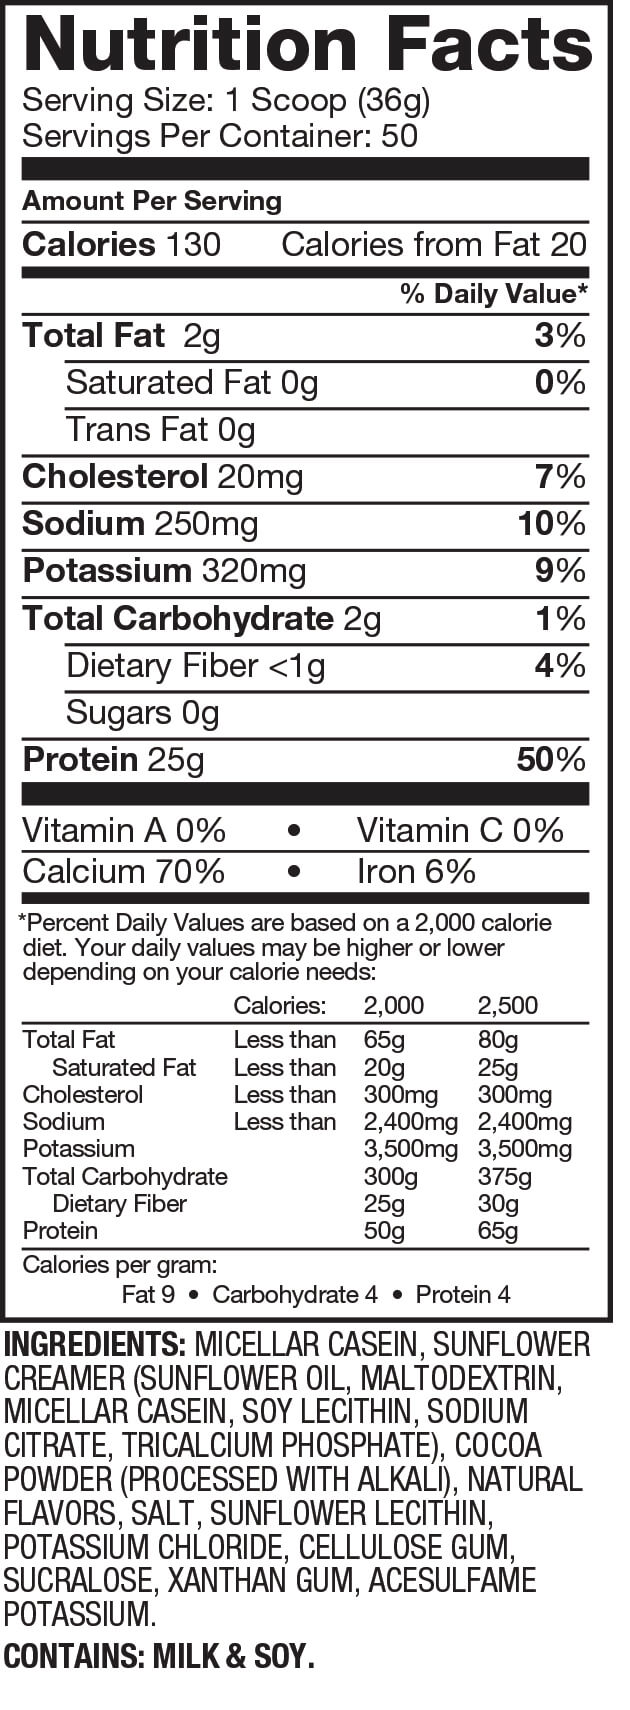 Nutrition facts for a 36g scoop: 130 Calories, 2g Total Fat, 20mg Cholesterol, 250mg Sodium, 25g Protein, and 70% Calcium. Contains milk and soy.